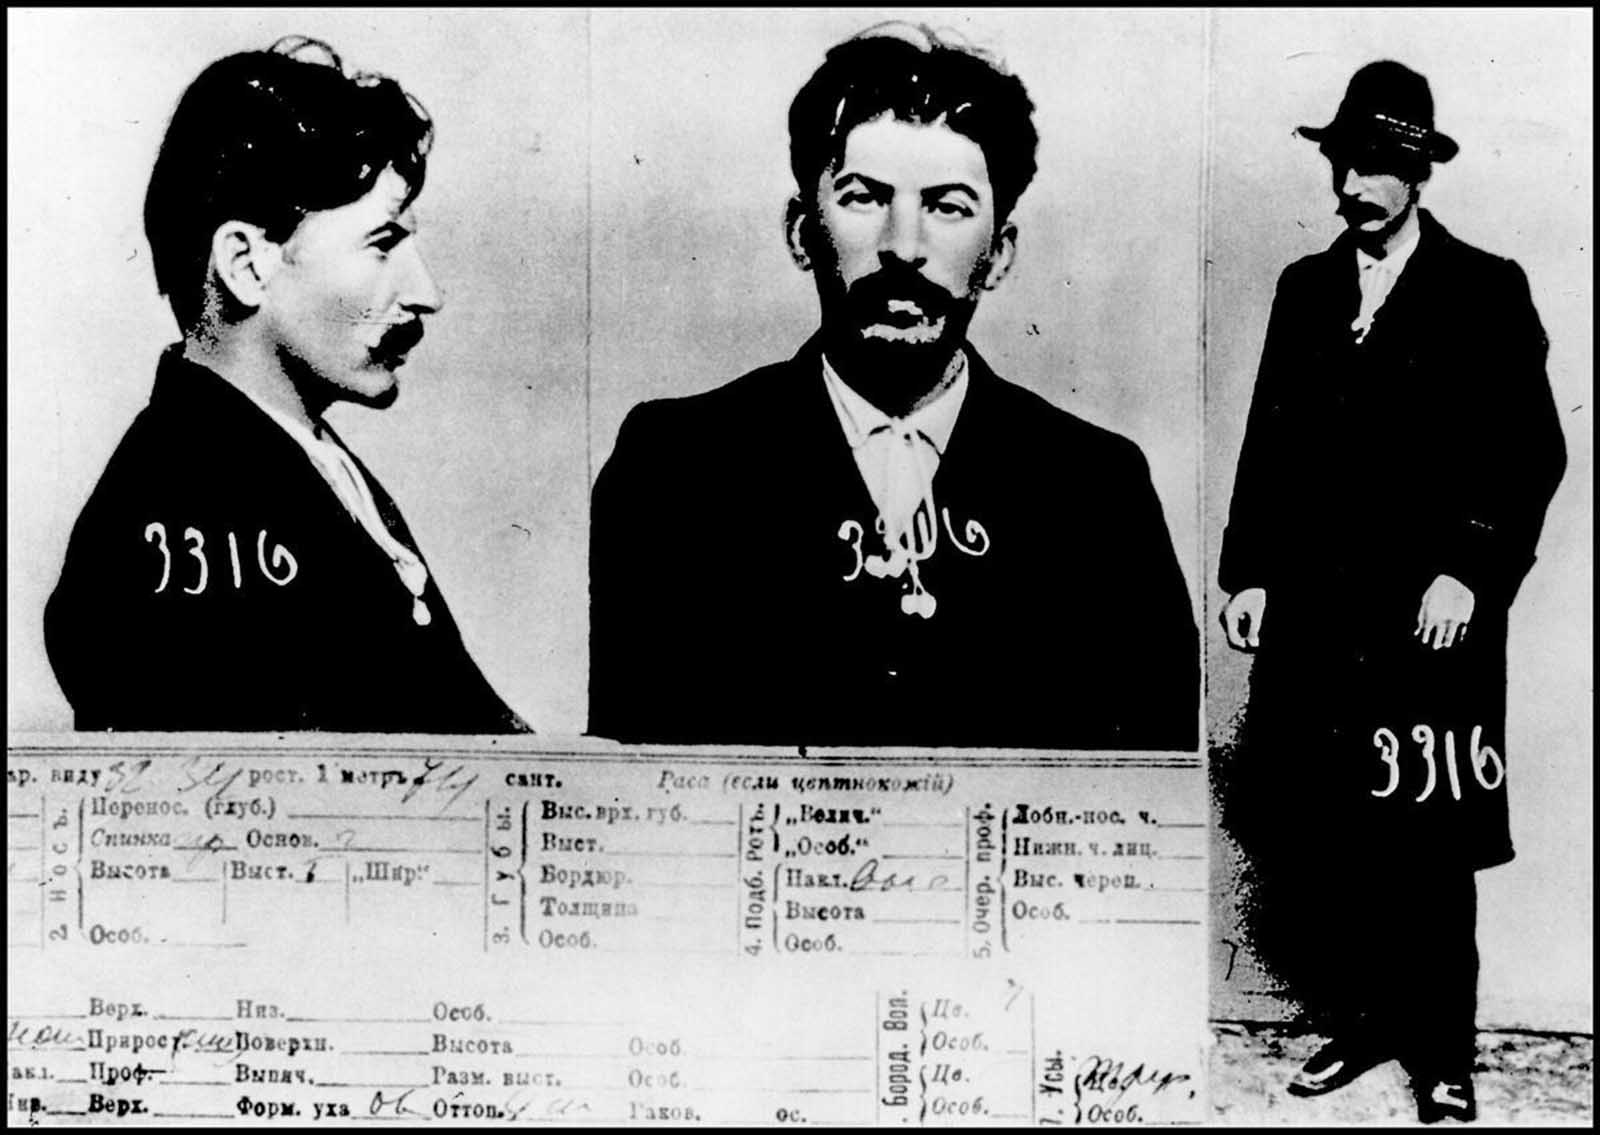 The information card on “I. V. Stalin”, from the files of the Imperial police in Saint Petersburg, 1911